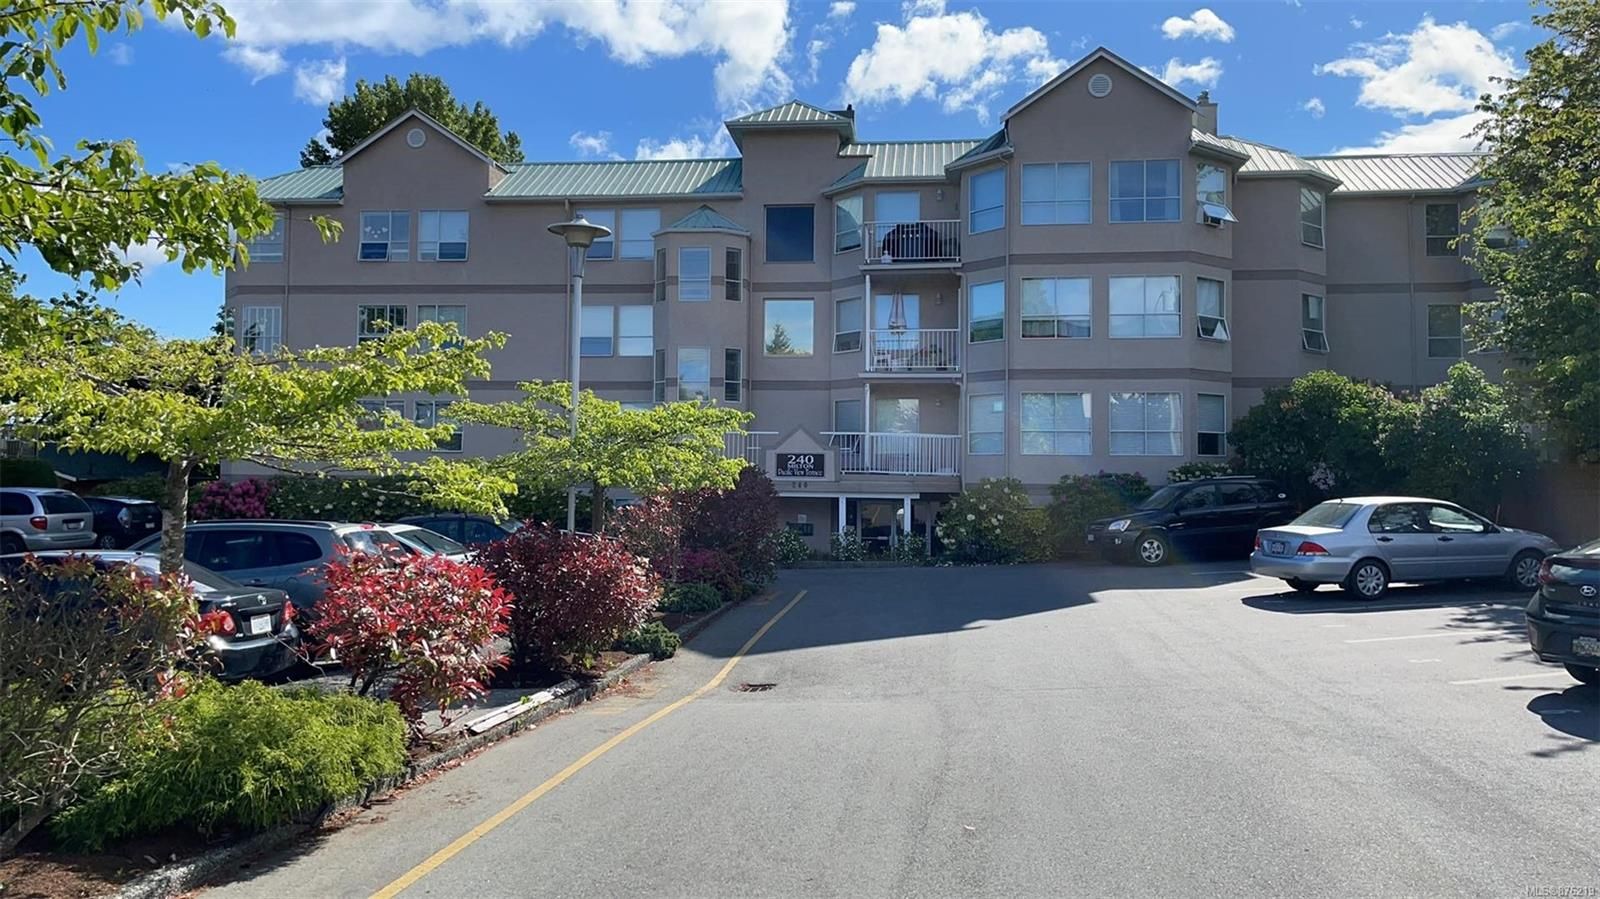 New property listed in Na Old City, Nanaimo